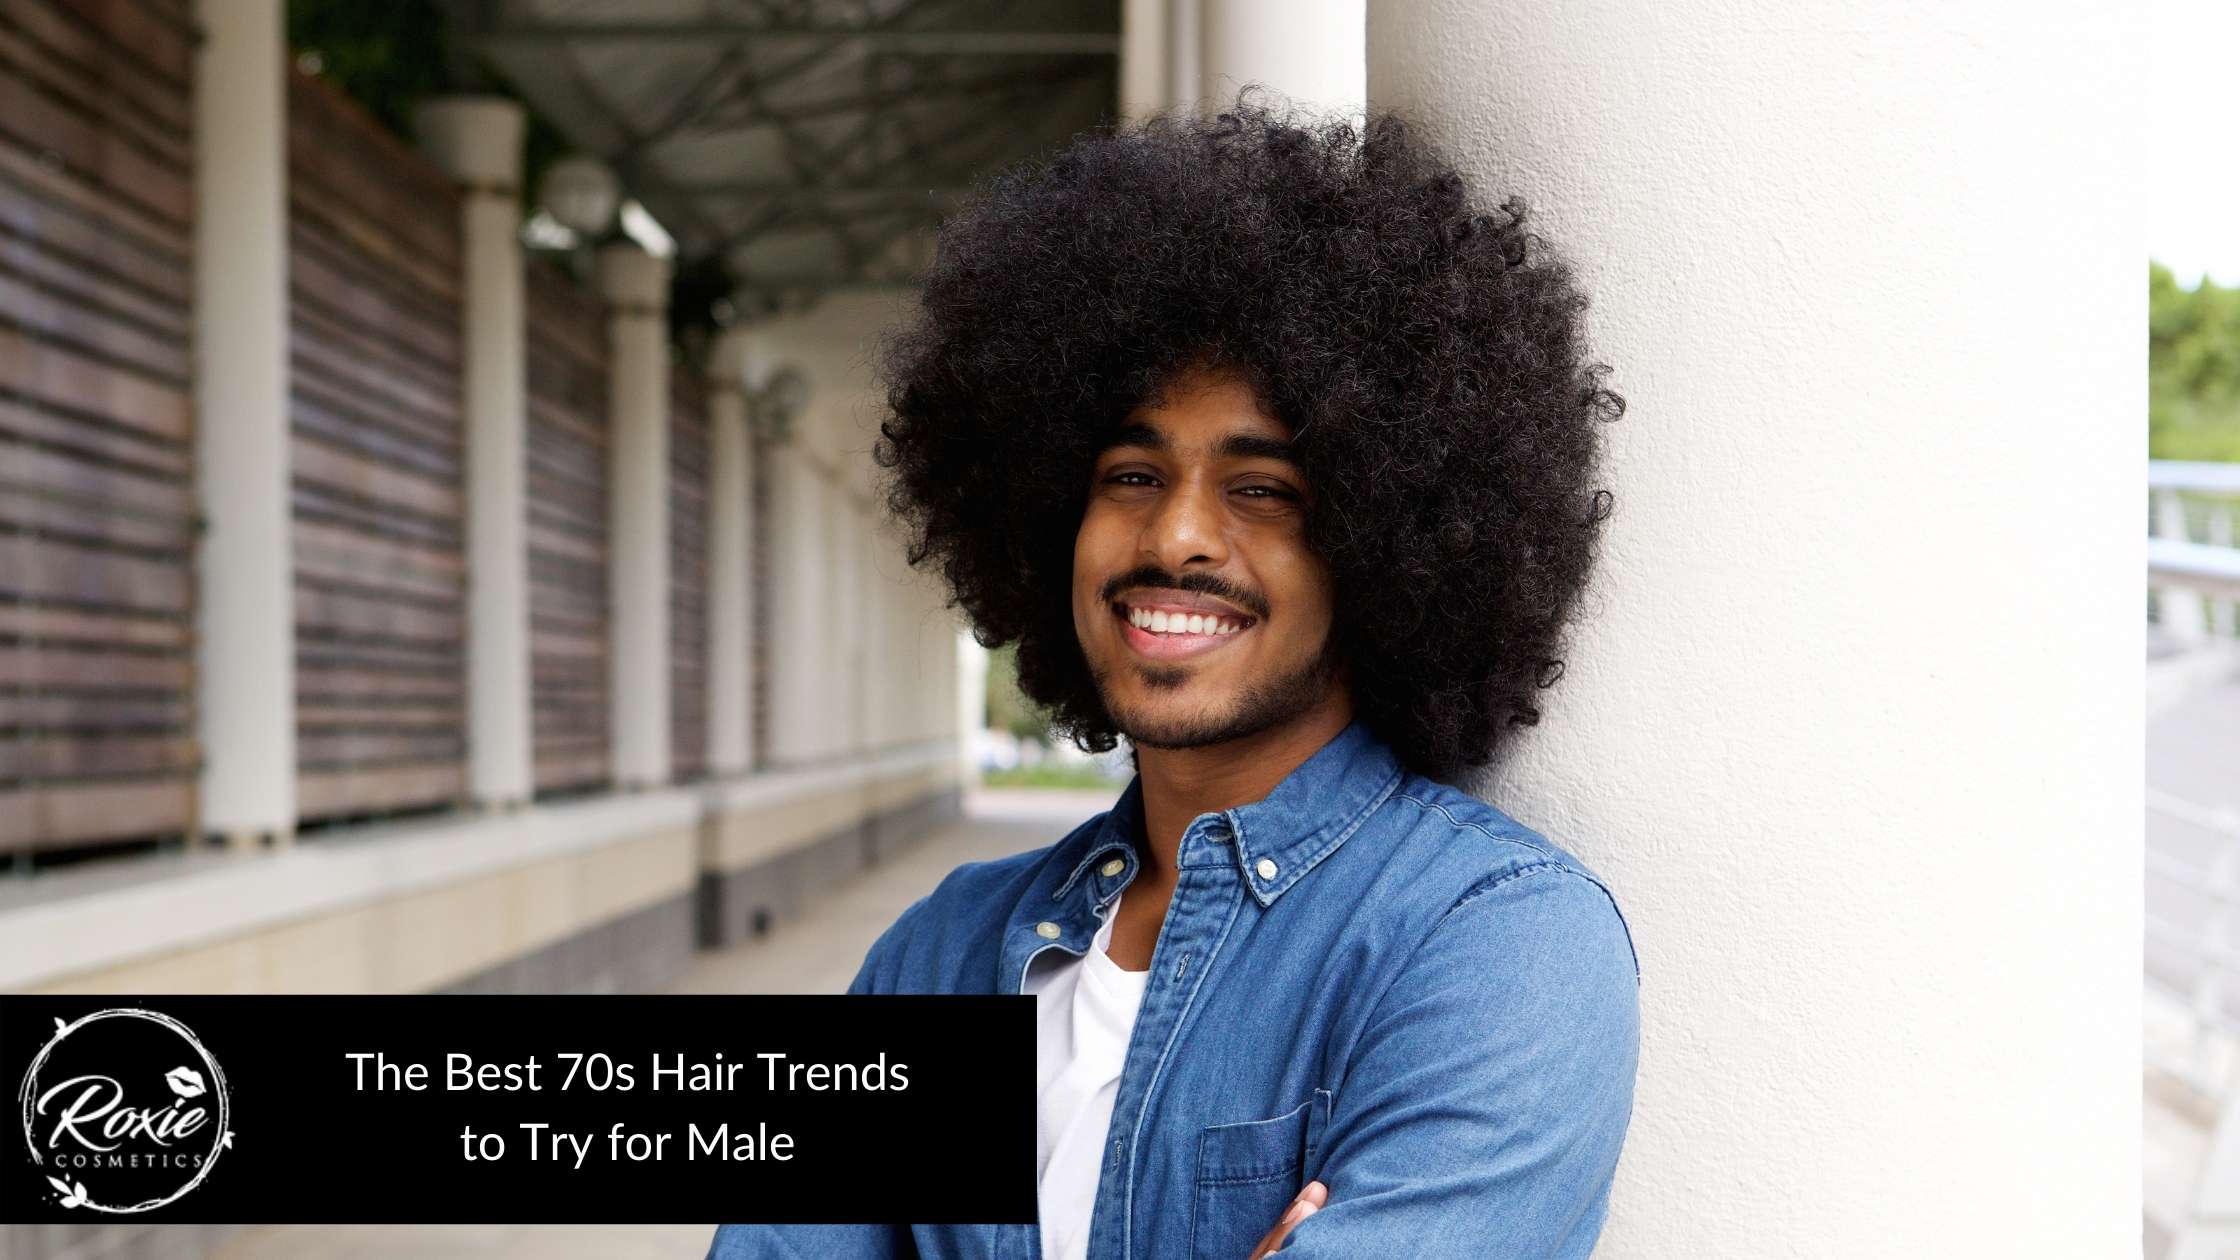 18 Best 70s Hair Trends to Try for Male – Roxie Cosmetics